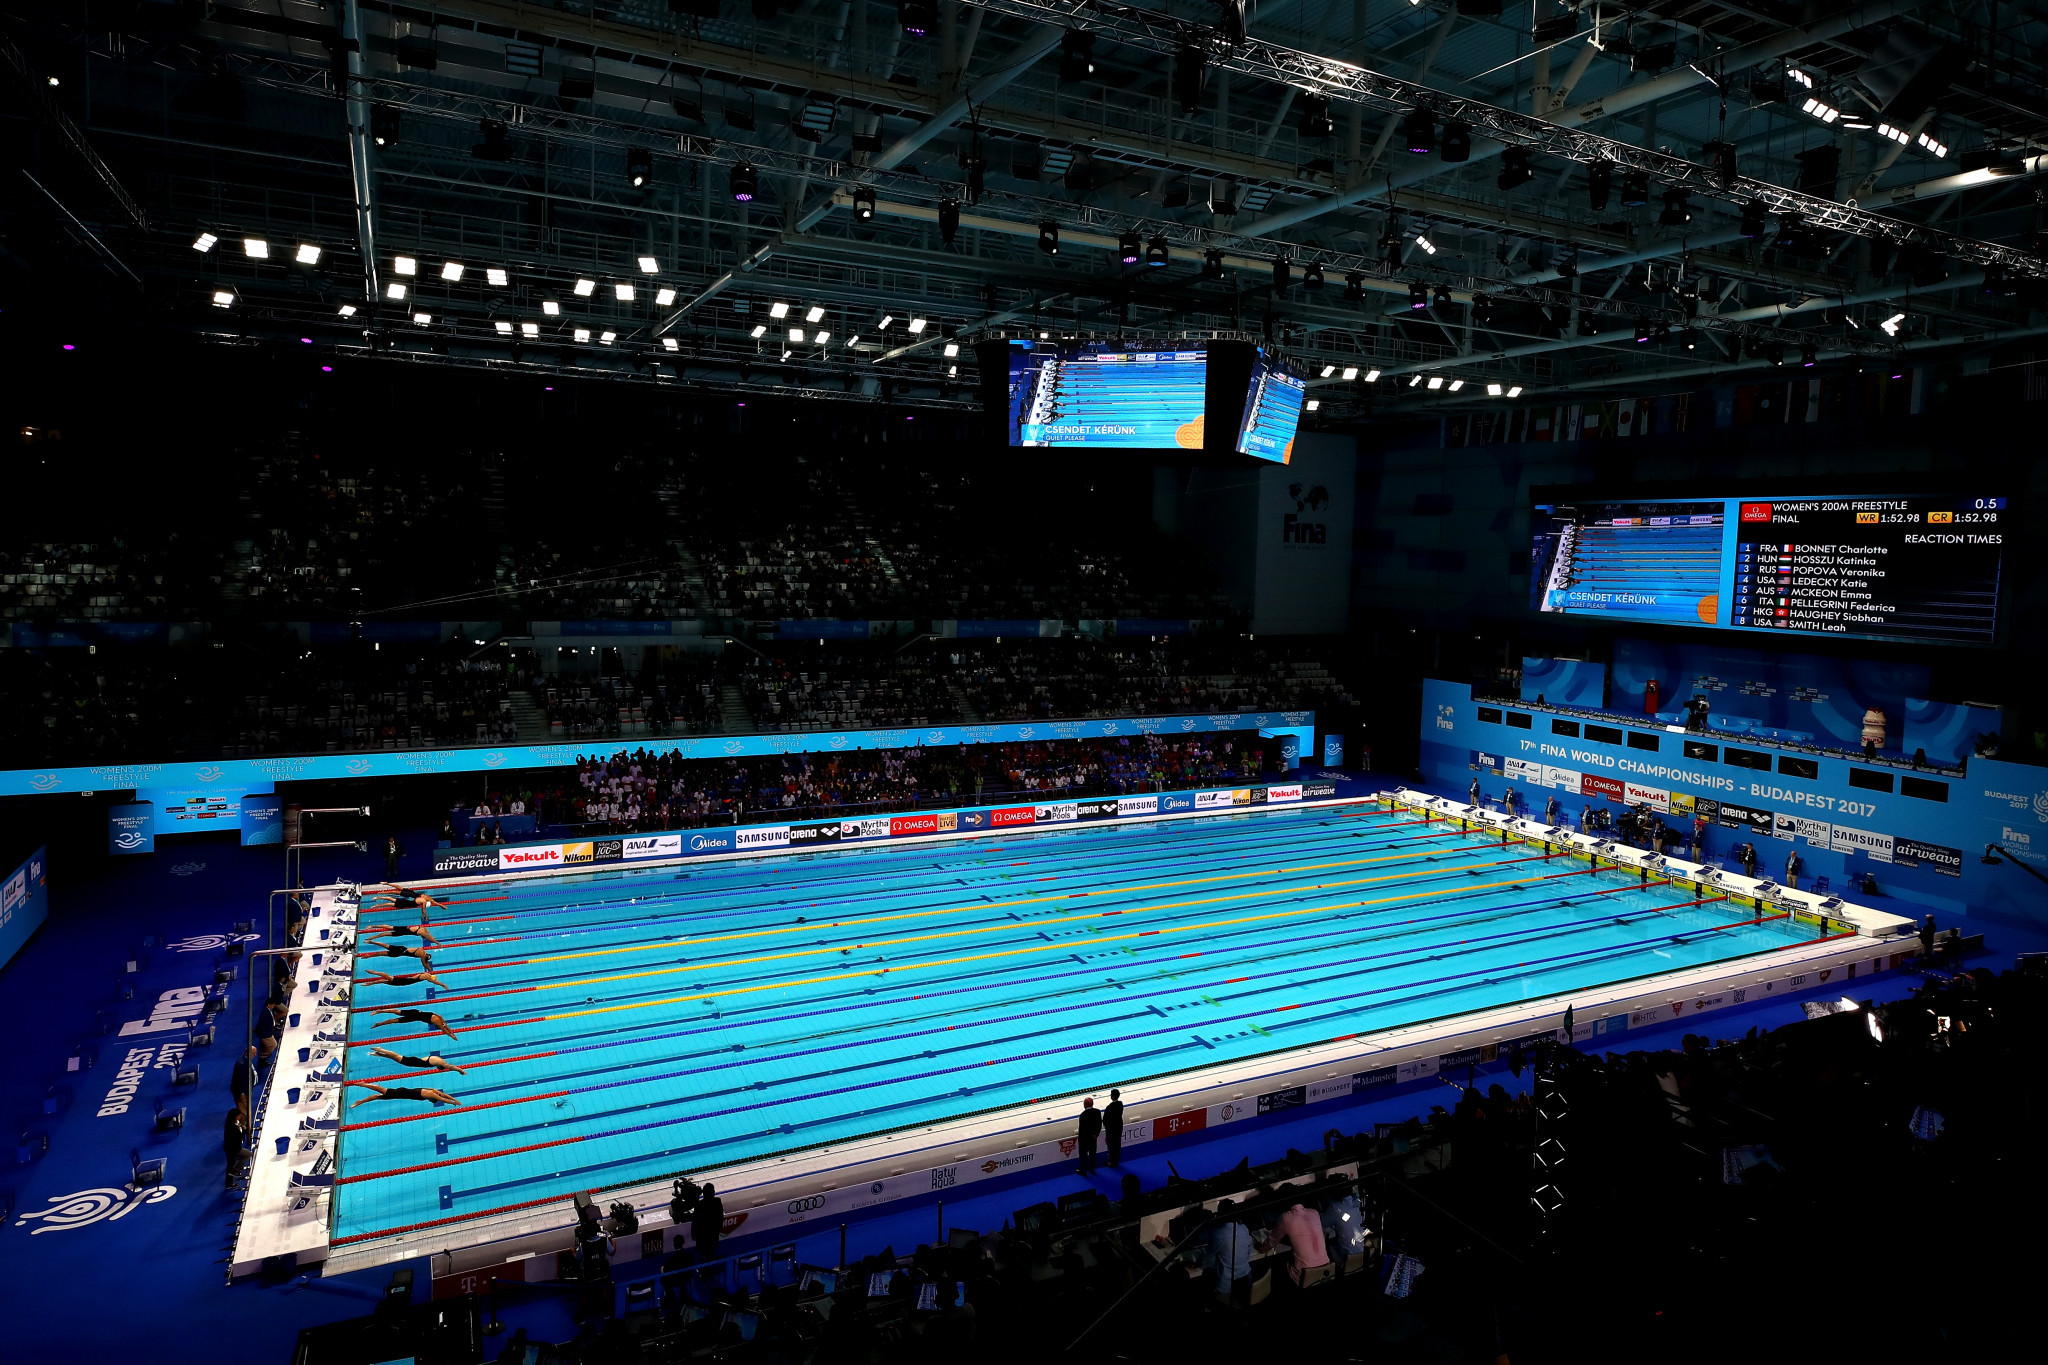 The Duna Arena in Budapest will host the 2027 World Aquatics Championships ©Getty Images